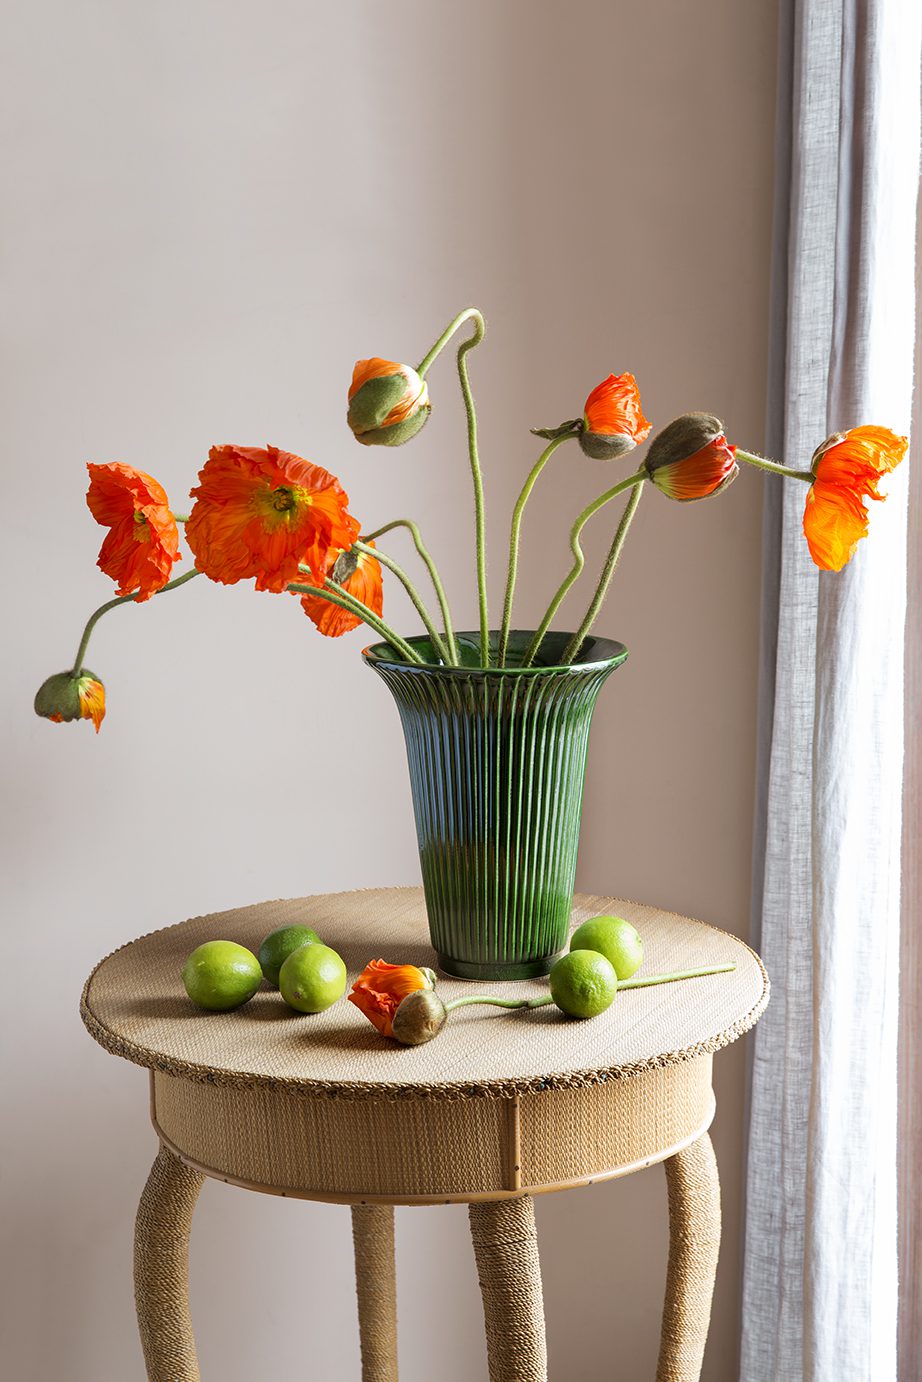 Green vase with large orange flowers on a stool.